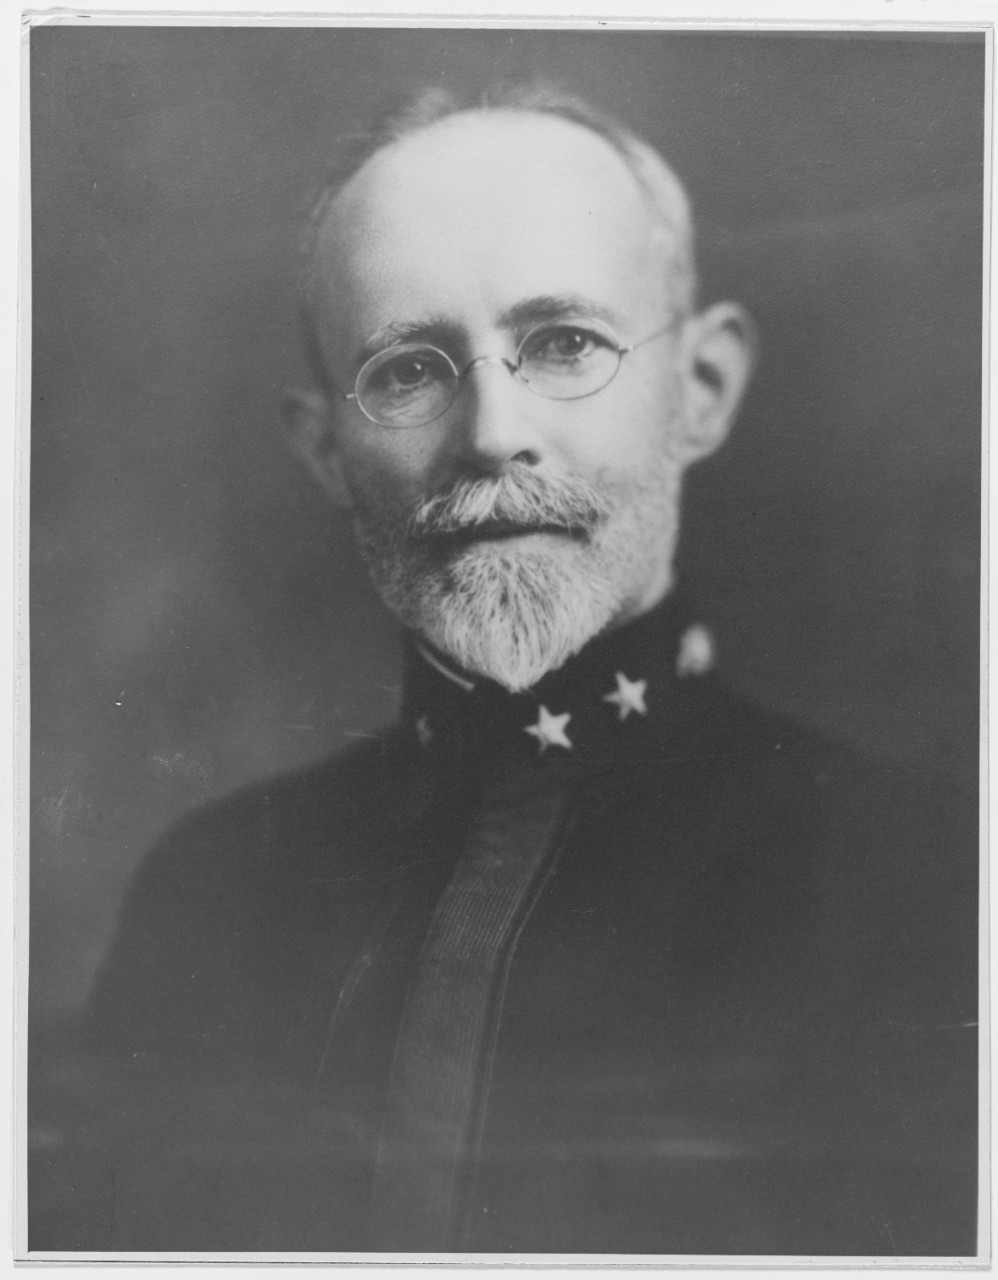 faded black and white portrait of bearded man looking at the camera wearing a uniform and glasses